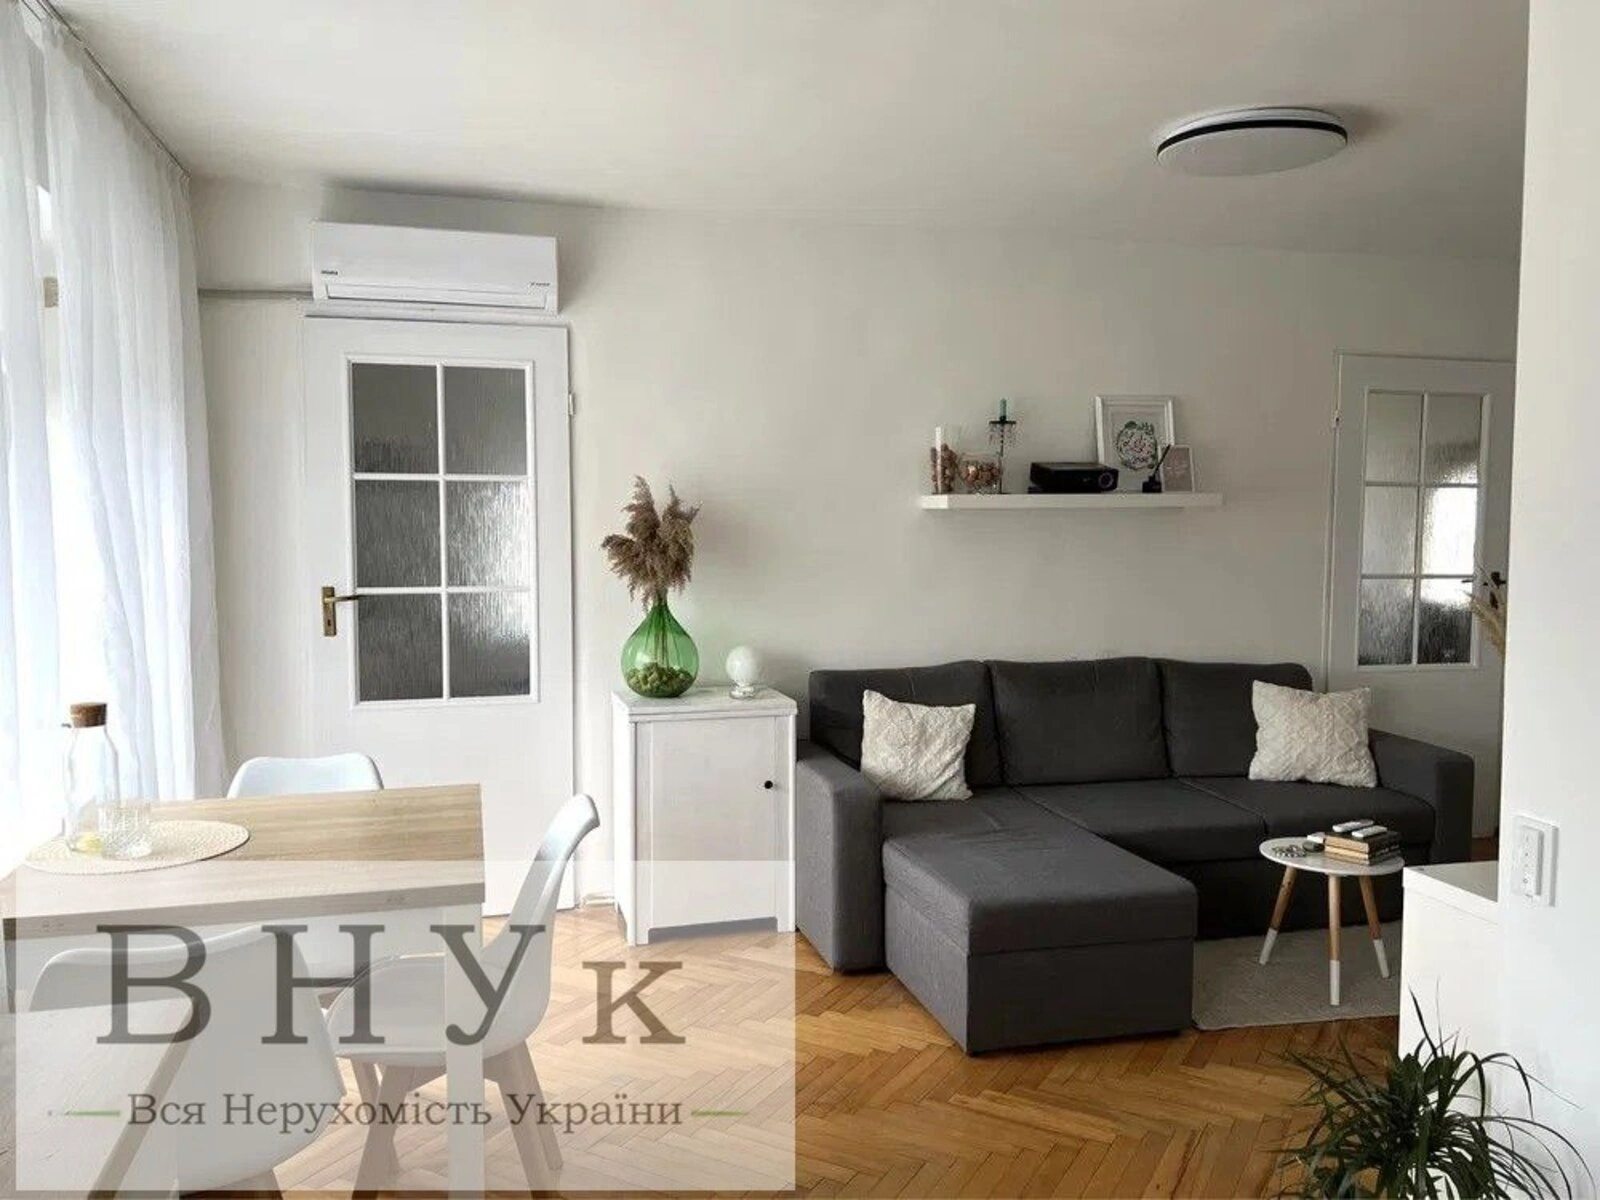 Apartments for sale. 3 rooms, 43 m², 2nd floor/2 floors. Lychakivskyy rayon, Lviv. 